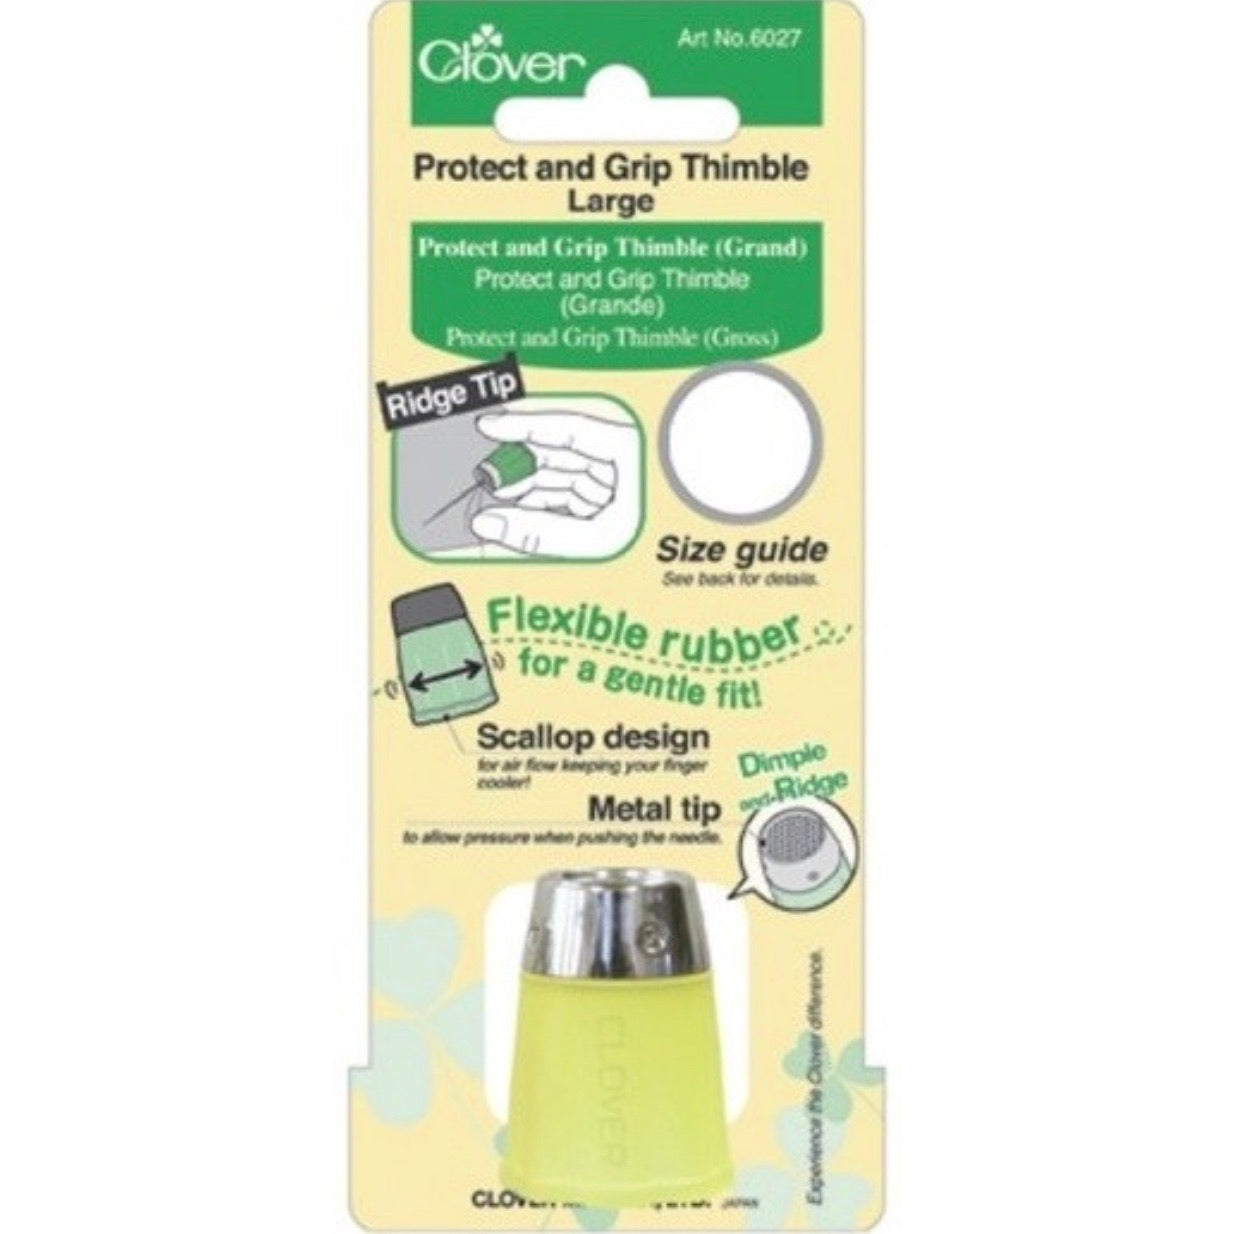 Grip and Protect Thimble - Large